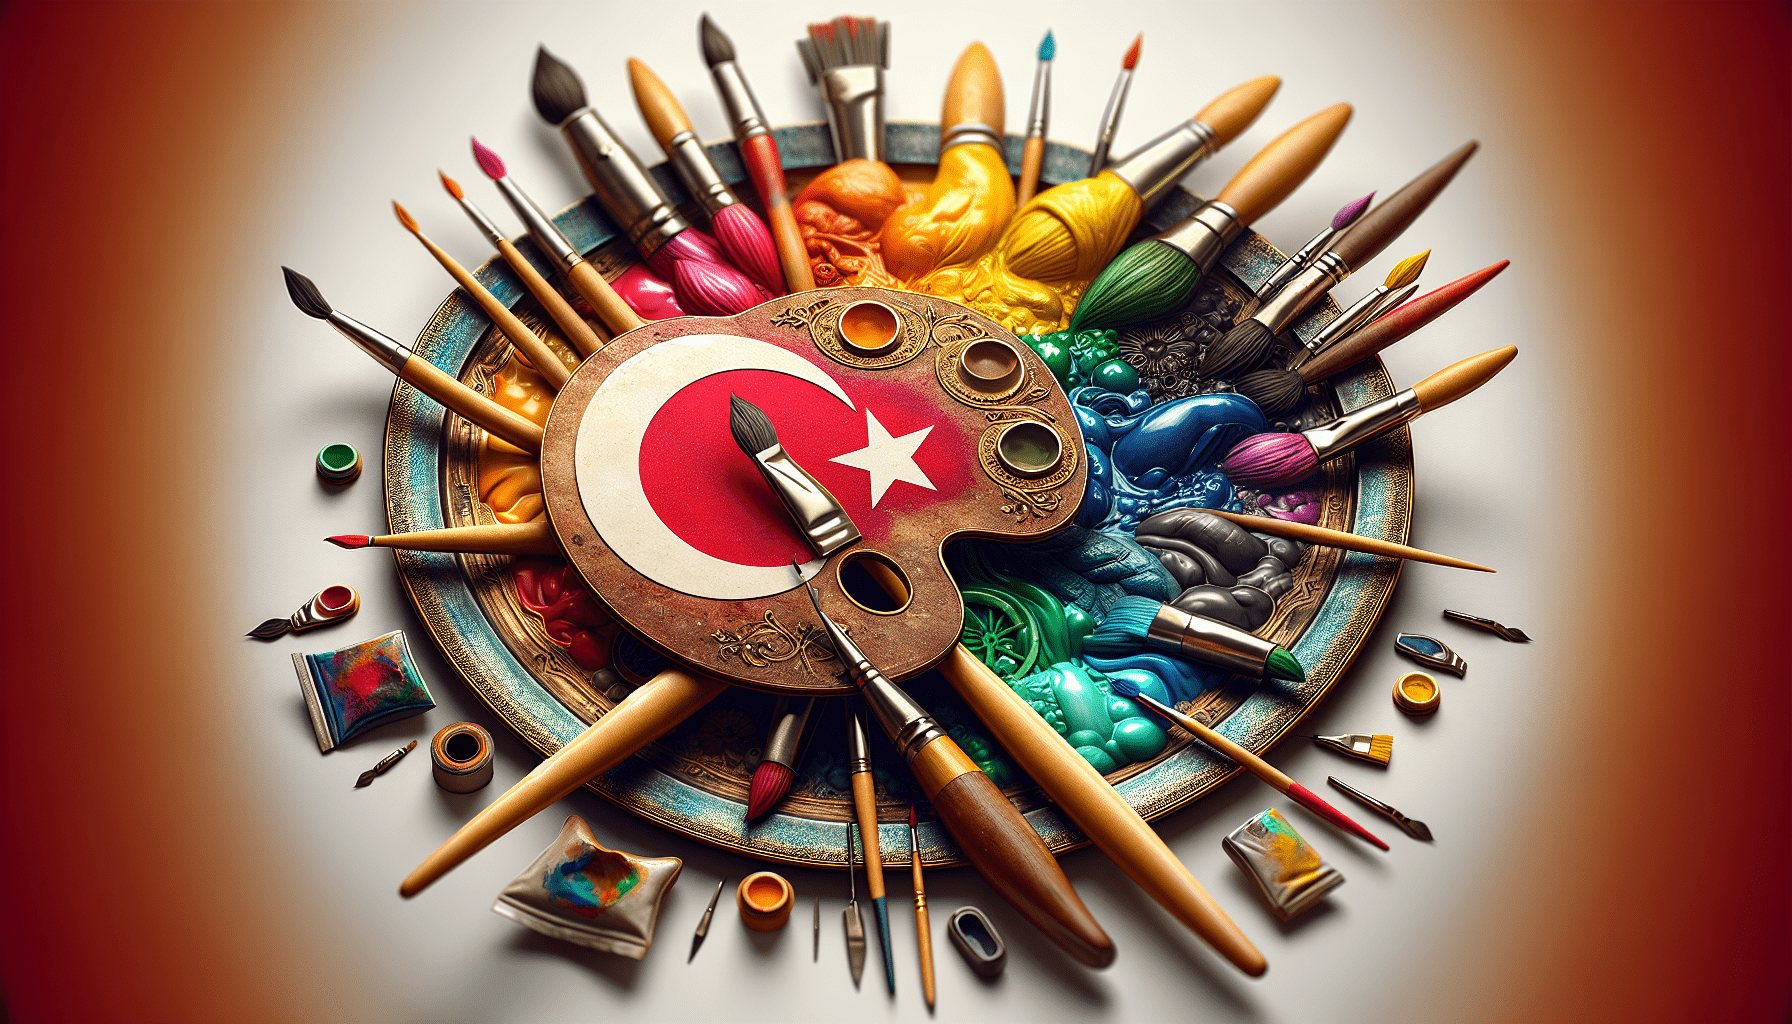 A painter's palette with the Turkish flag sits at the center of a circular arrangement of paintbrushes, paint tubes, and various art supplies displaying a spectrum of colors.